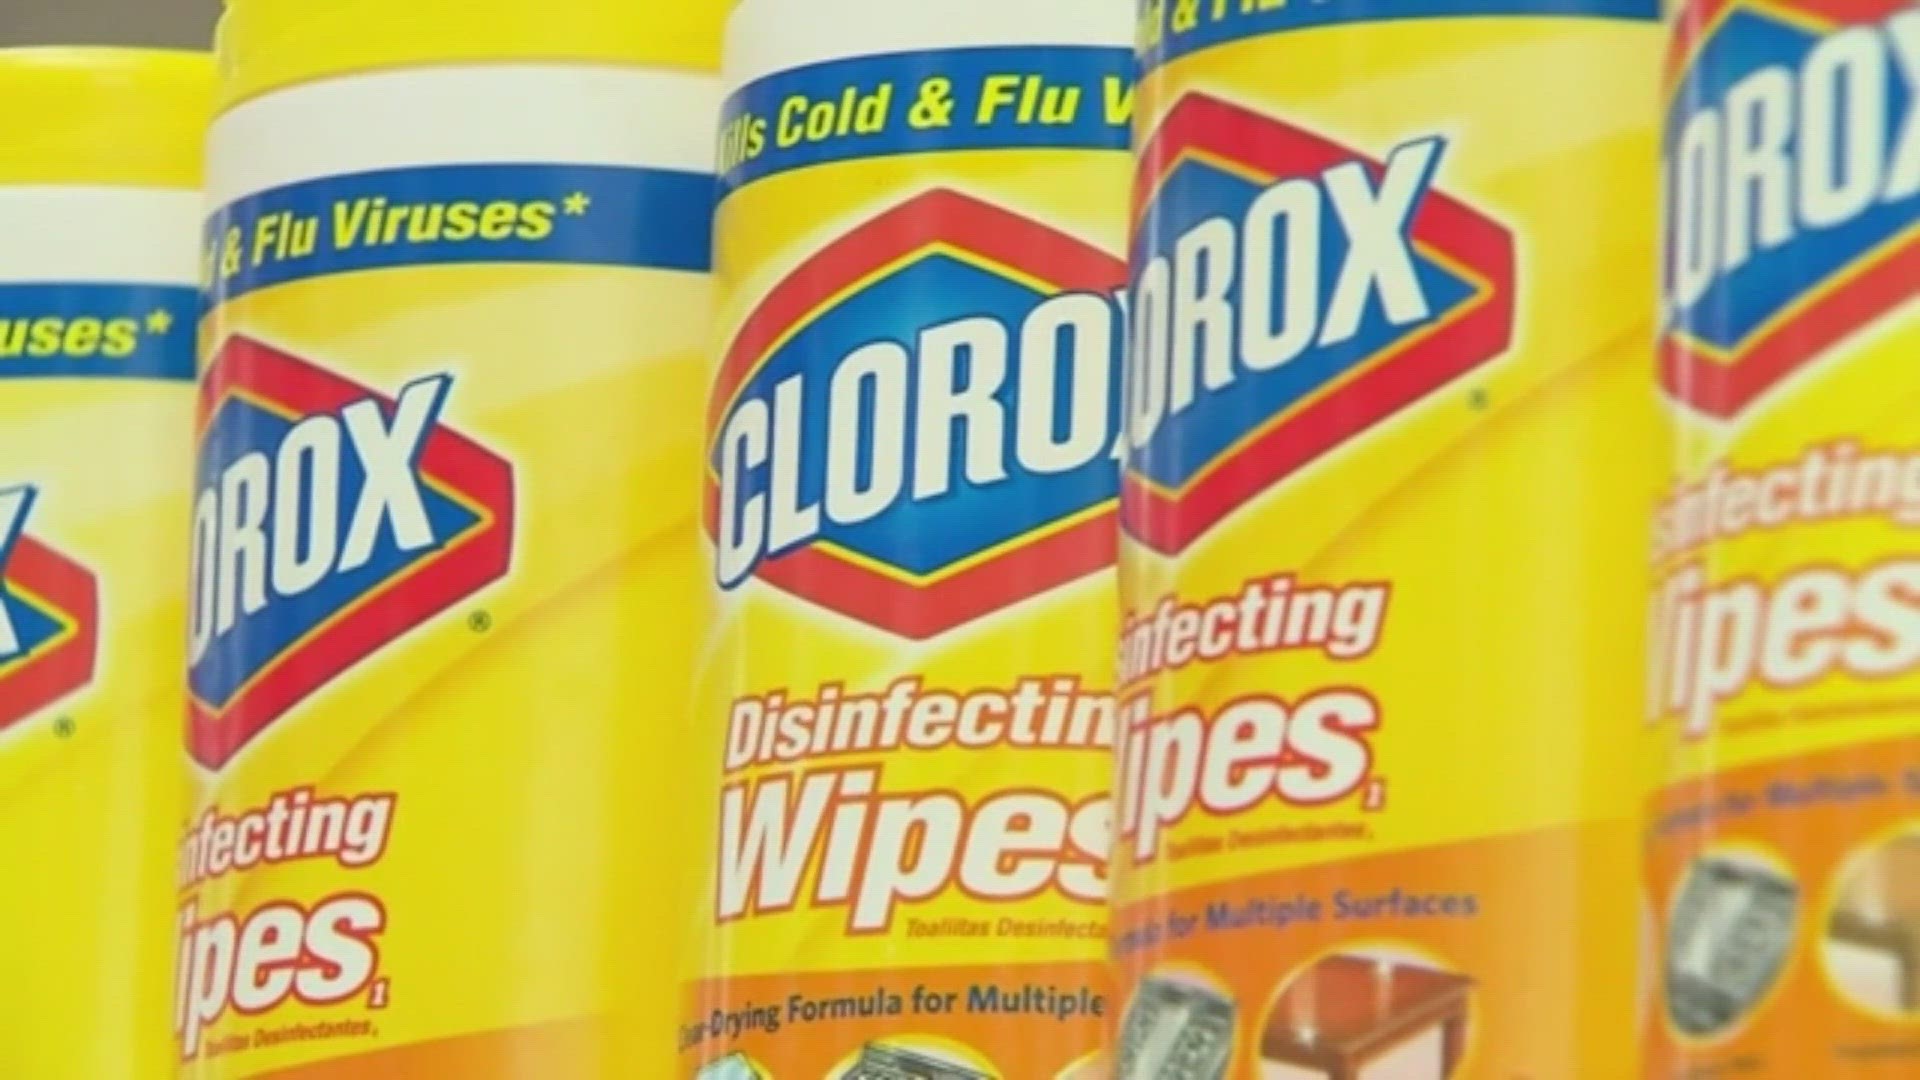 You may have problems finding some Clorox products in your local store.